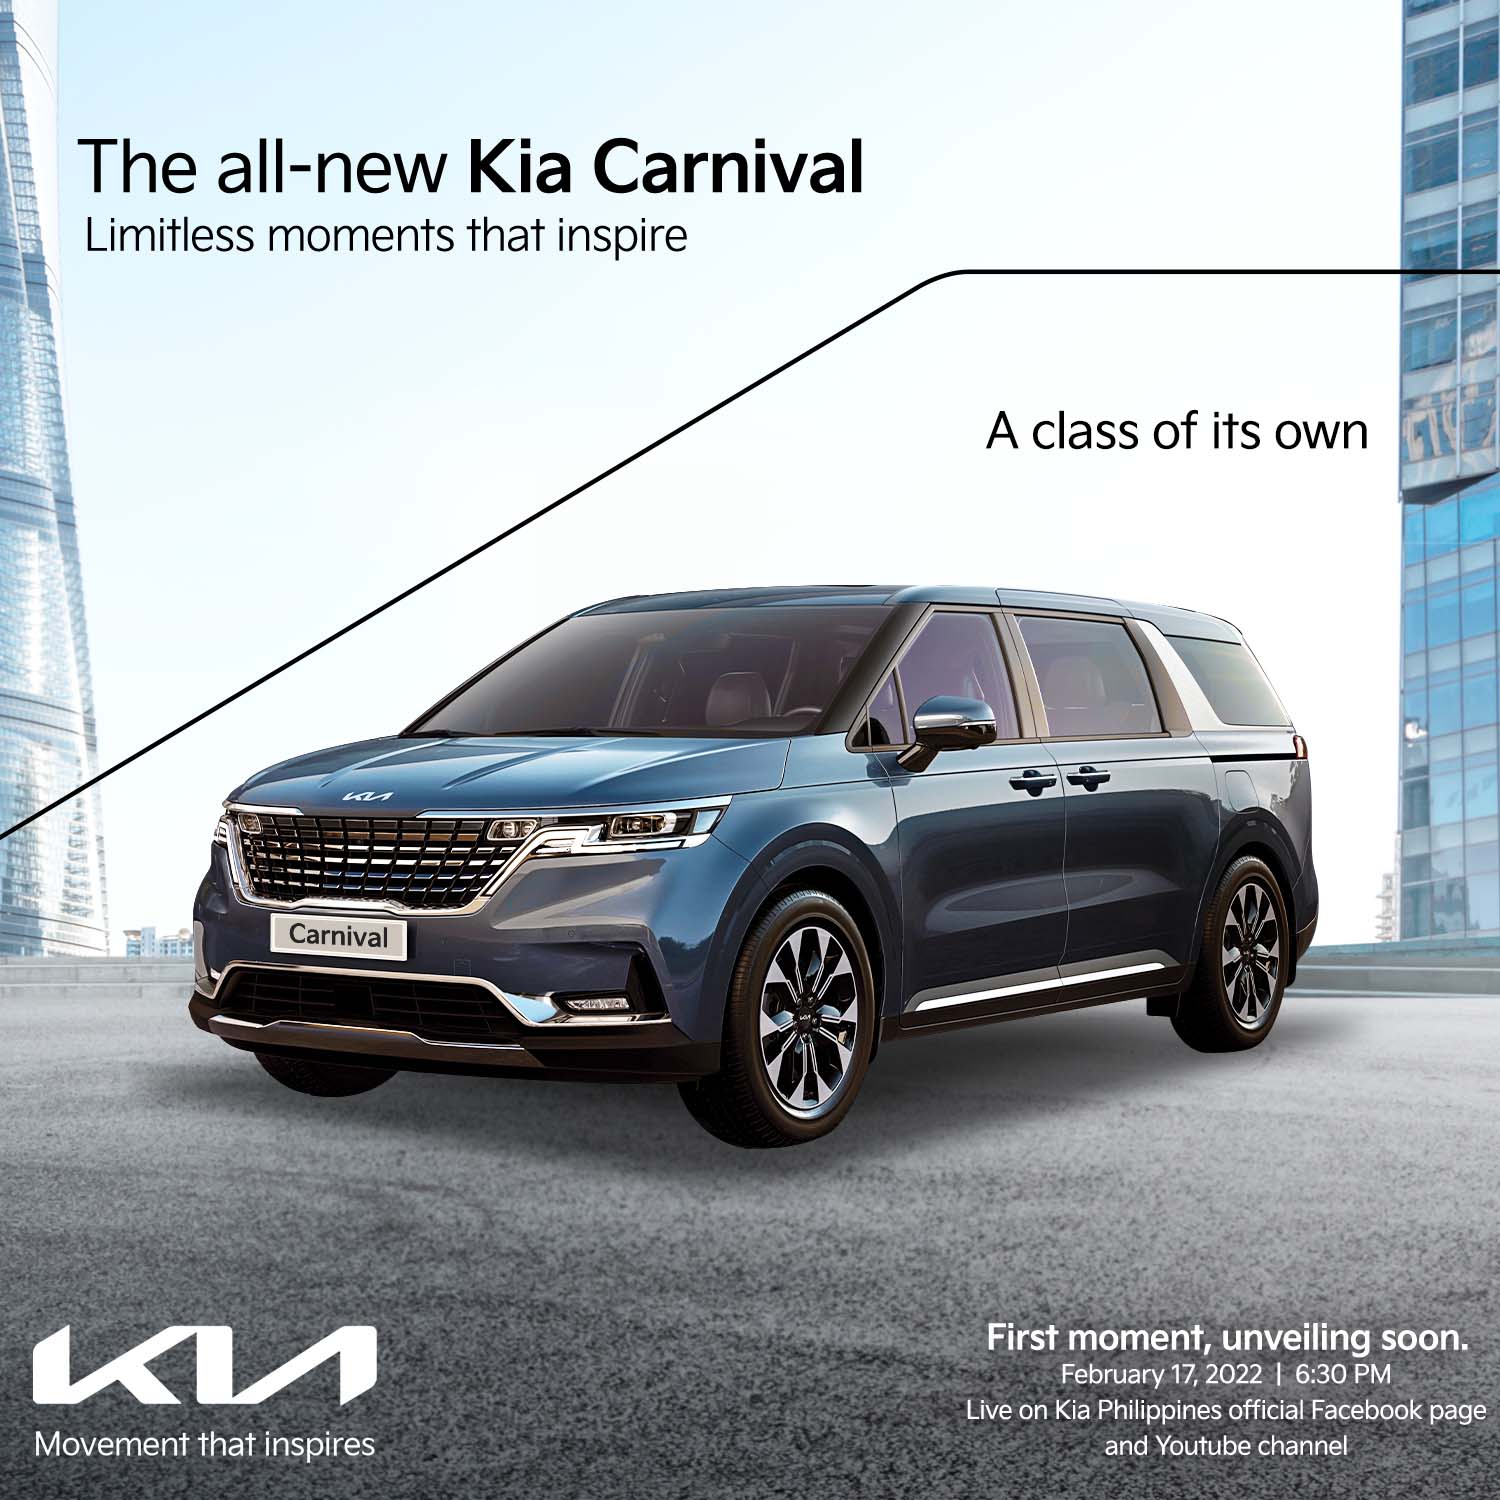 All-new Kia Carnival grand utility vehicle for executives launching soon